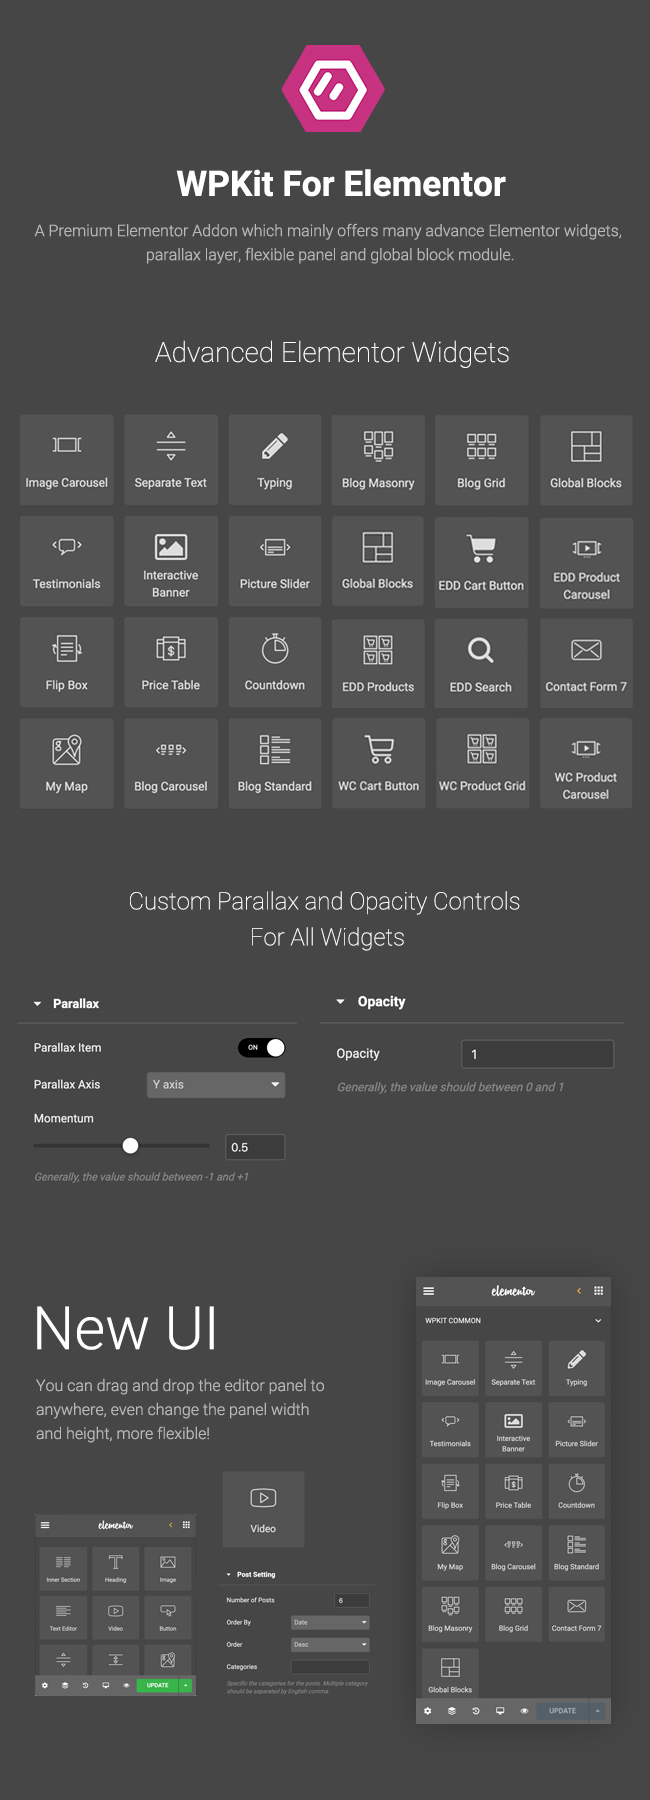 WPKit For Elementor | Advanced Elementor Widgets Collection & Parallax Layer - 1